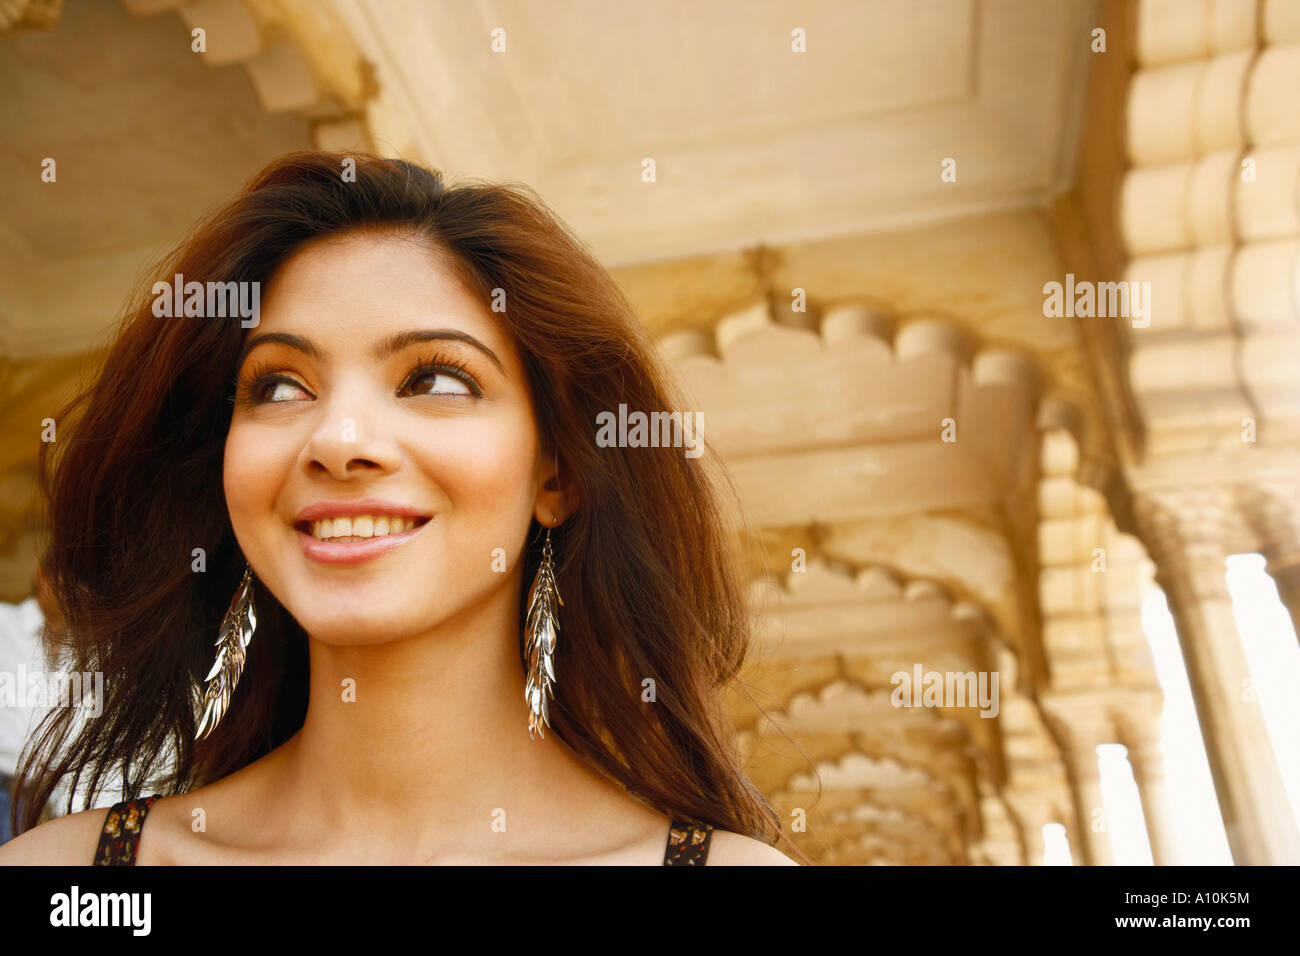 Close-up of a young woman smiling, Agra Fort, Agra, Uttar Pradesh, India Stock Photo